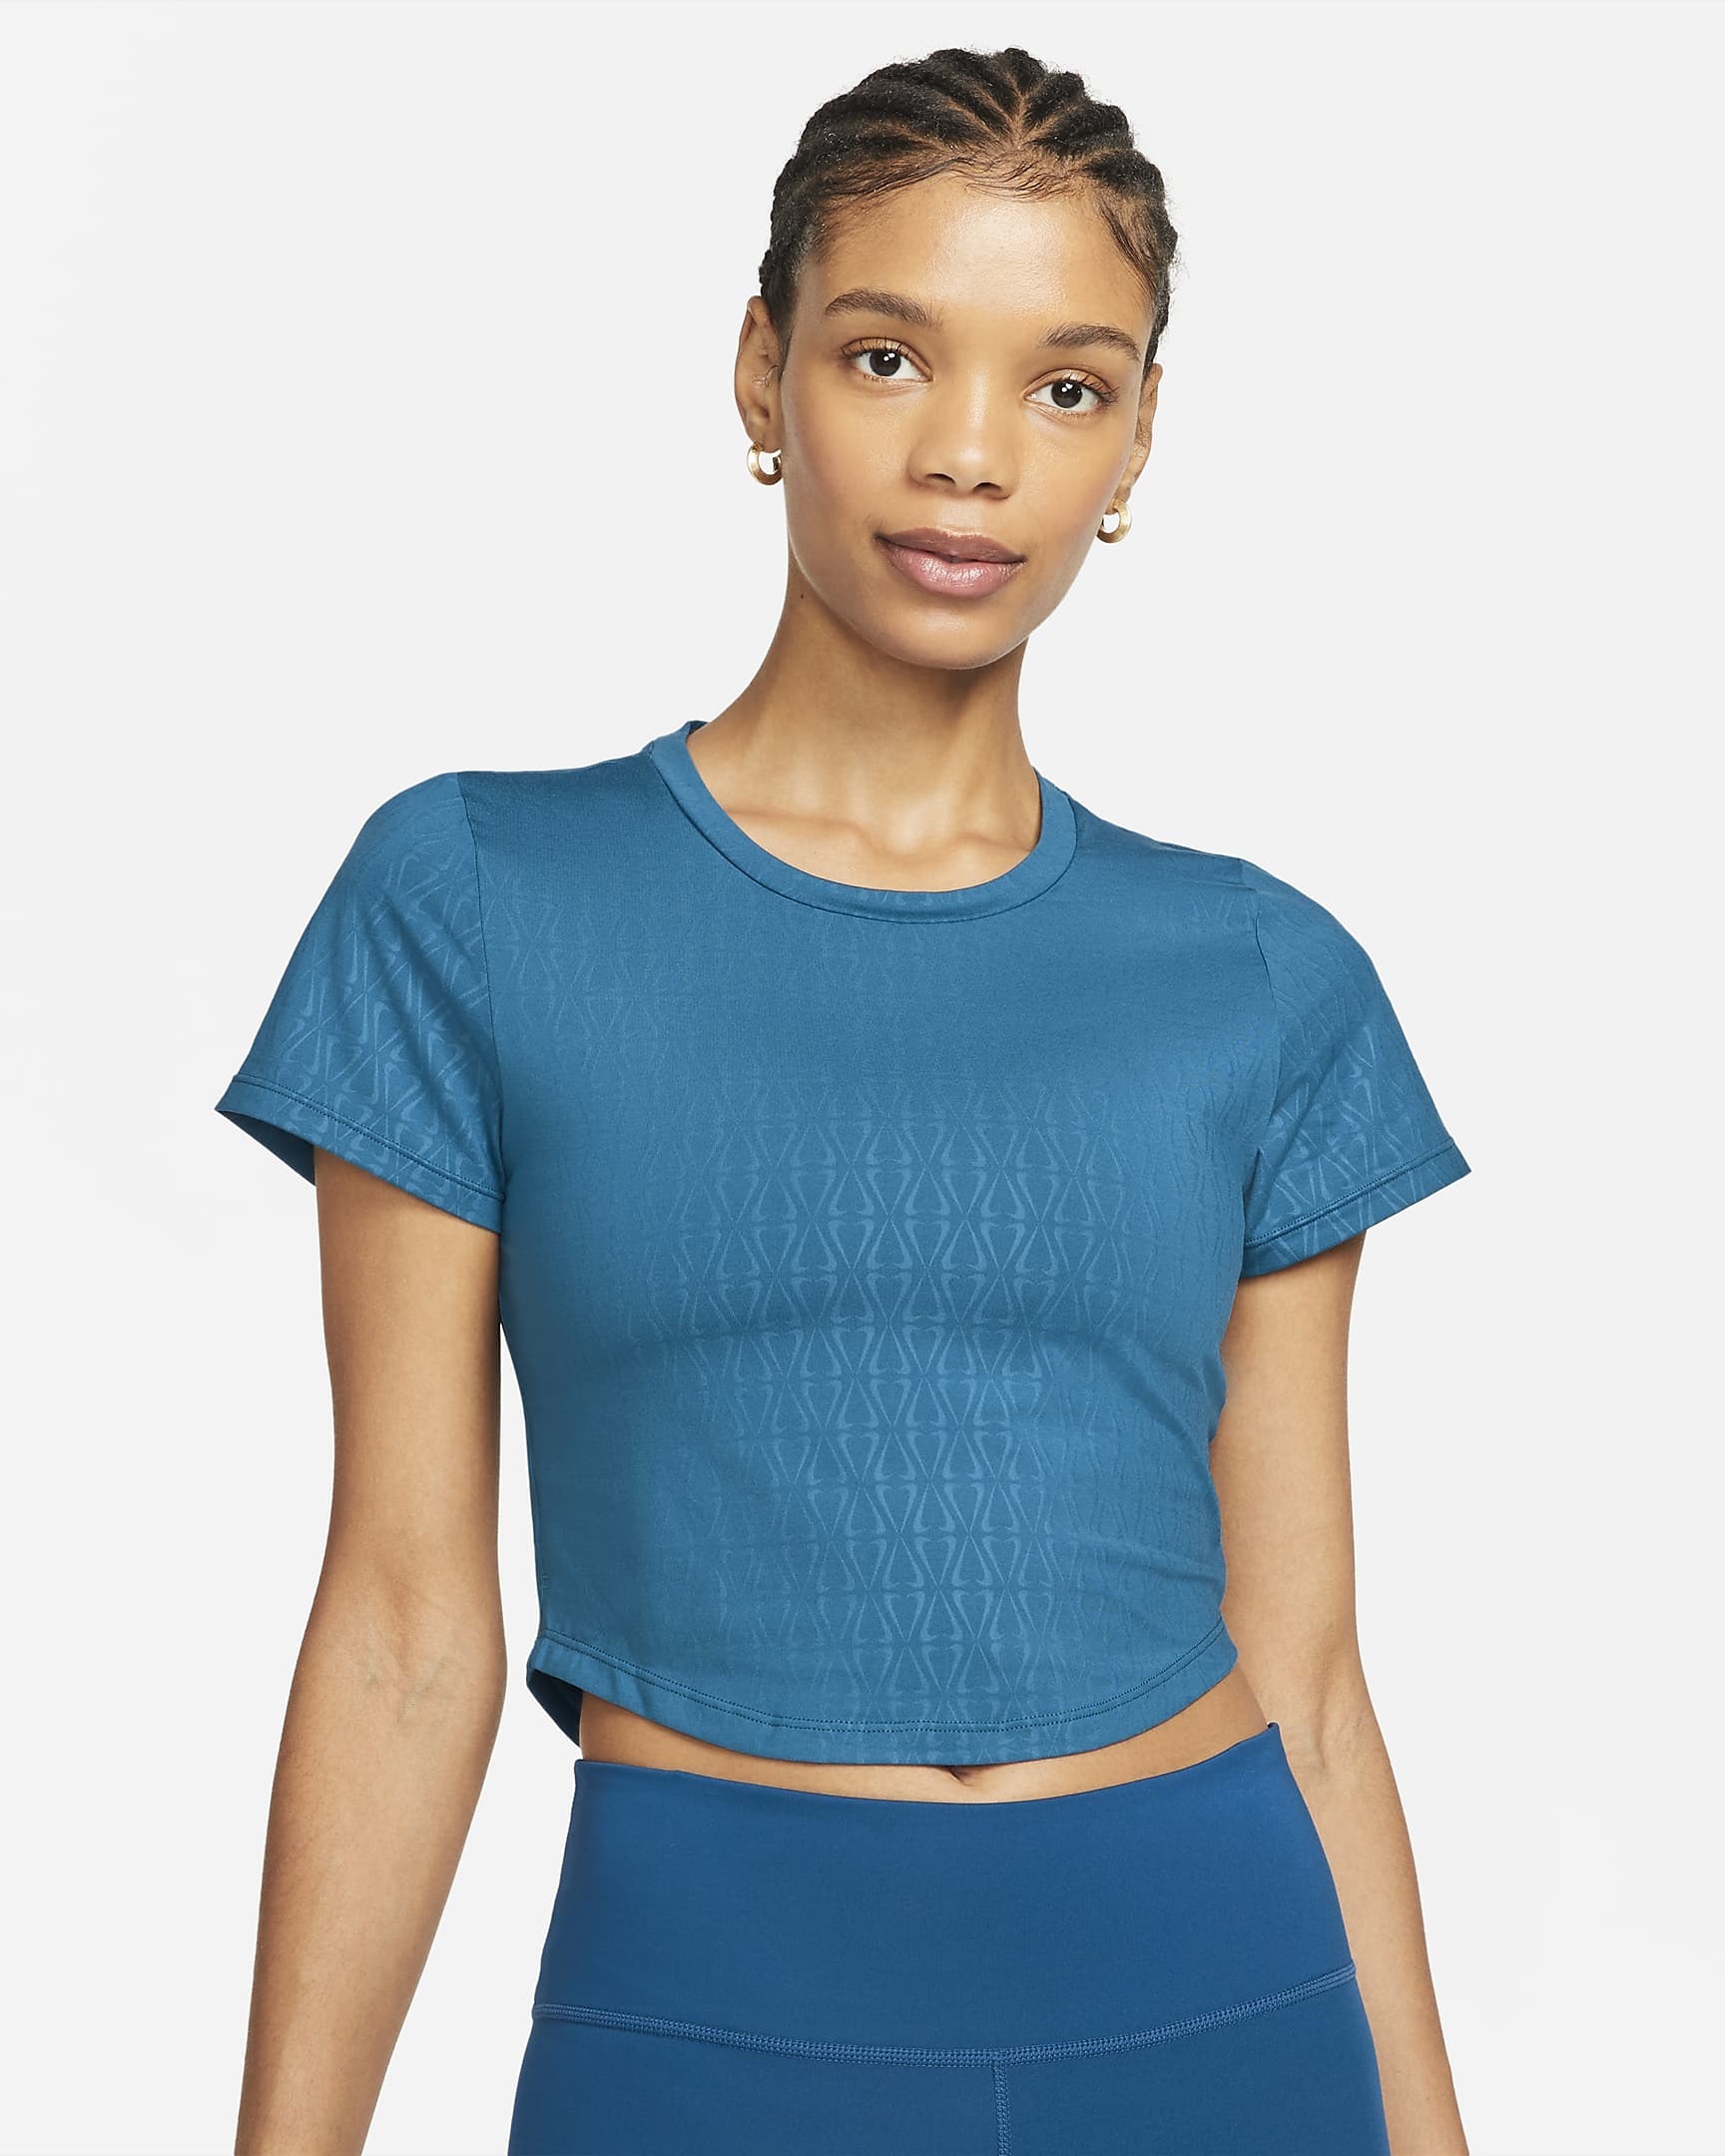 model in a blue cropped top with short sleeves and a curved hem